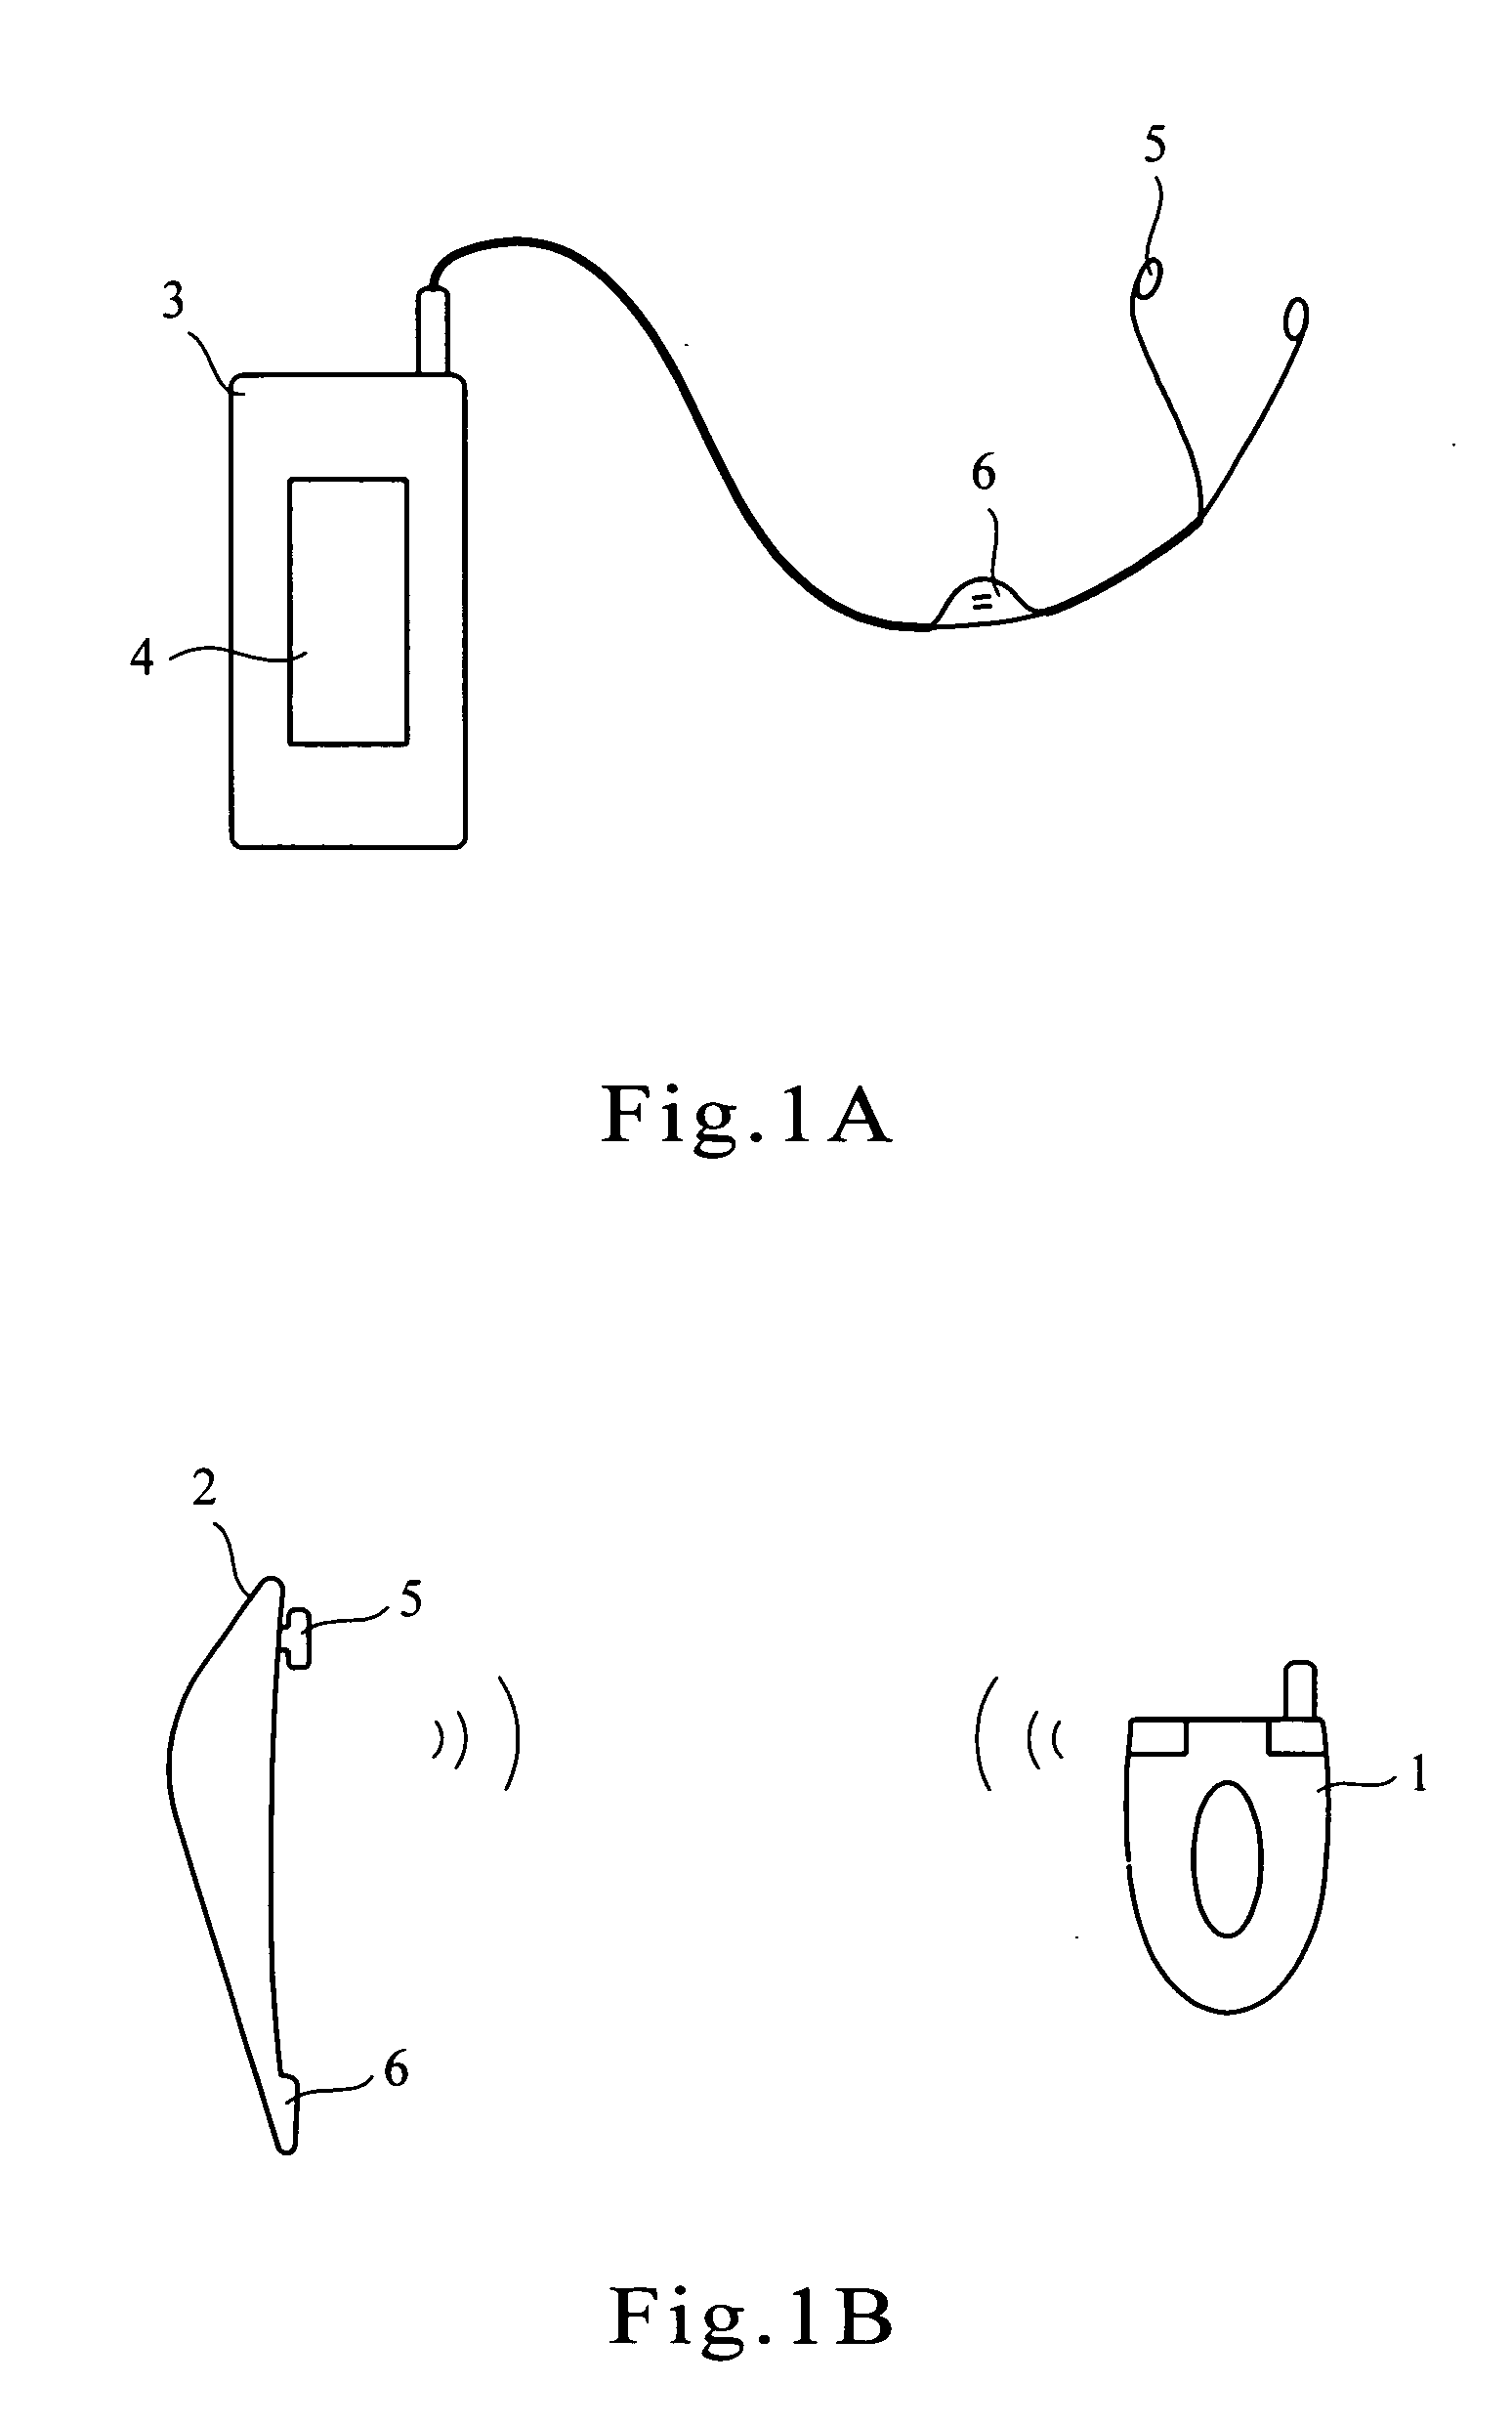 MP3 player having a wireless earphone communication with a mobile